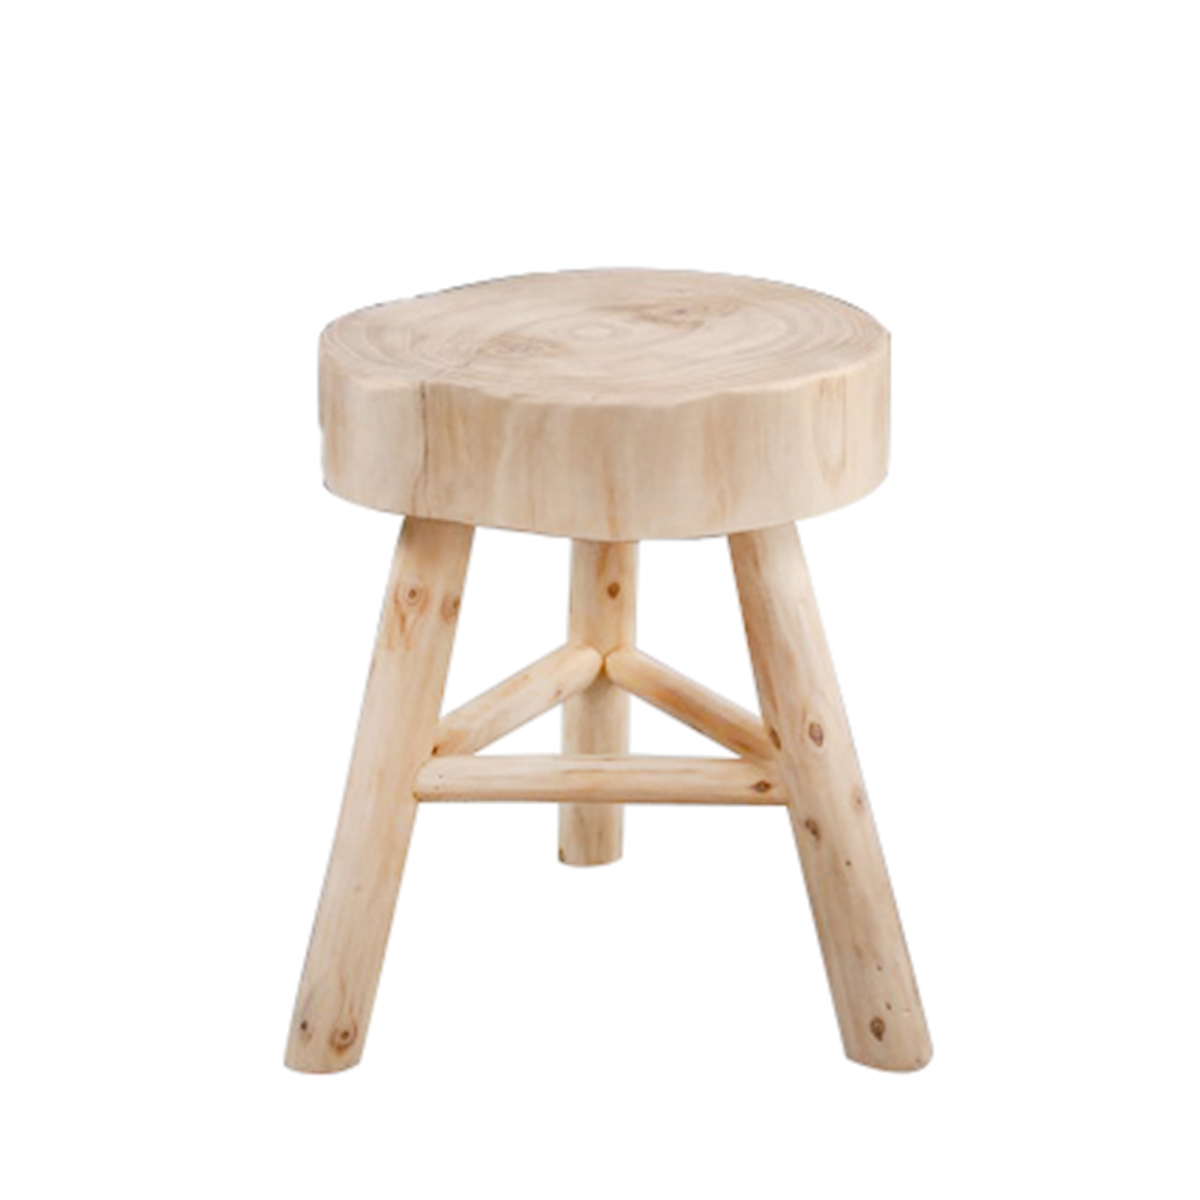 14339-02 15.75 In. Wooden Stool, Natural Color